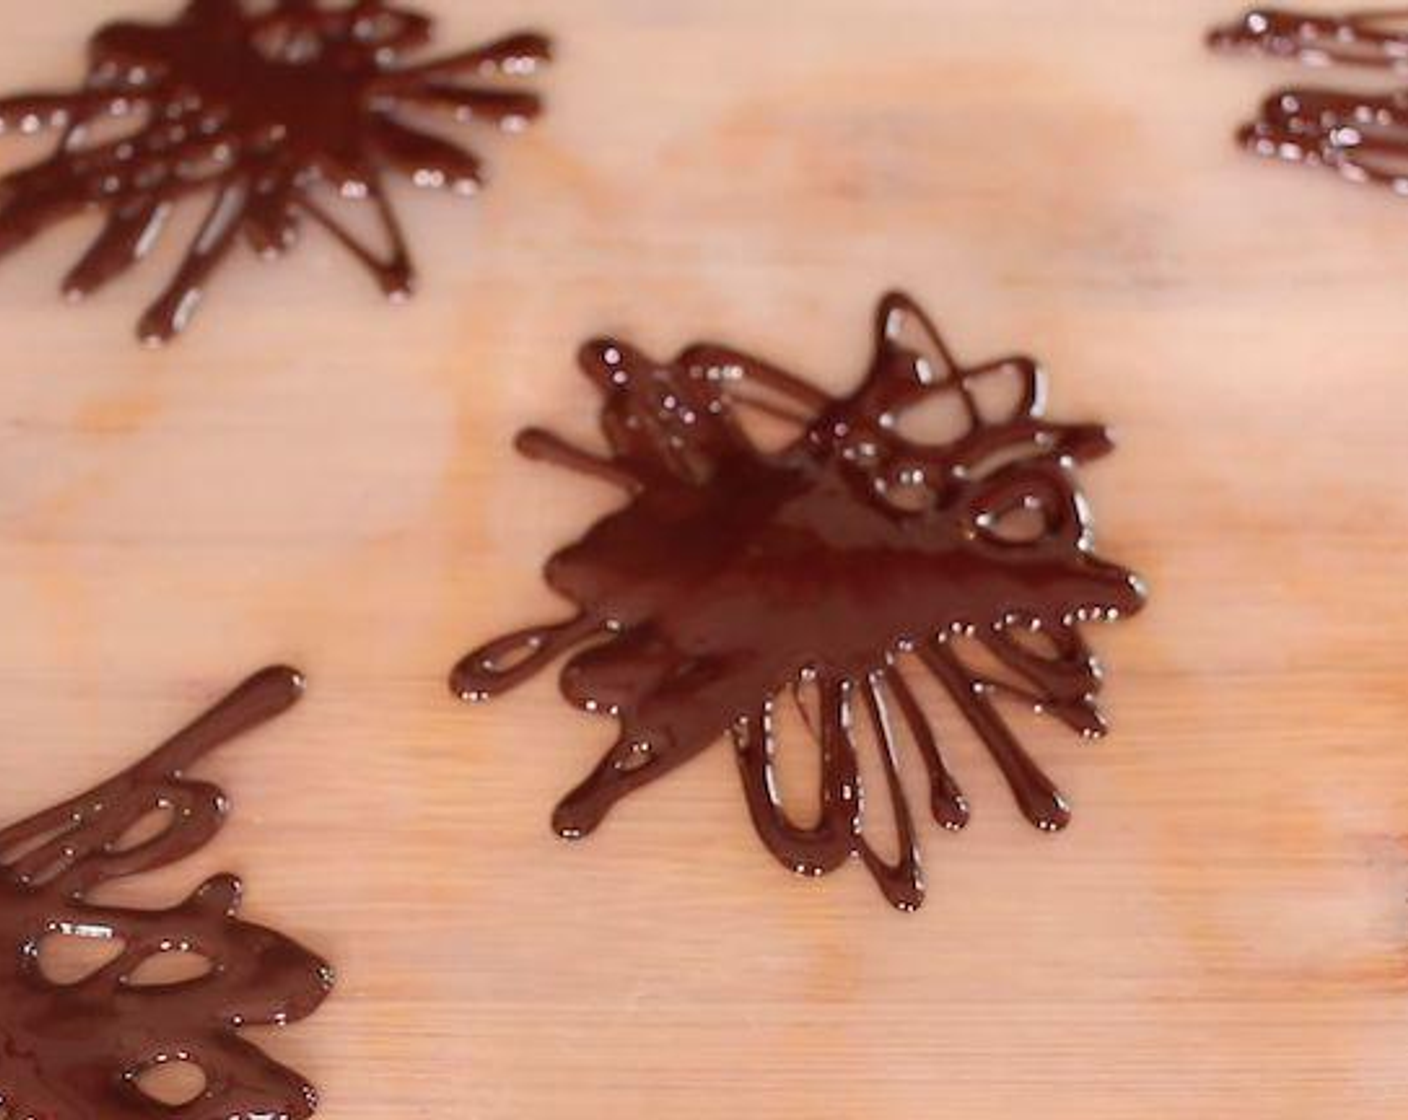 step 1 Heat the 70% Dark Chocolate (3/4 cup) in a bowl over a saucepan of hot water or melt in the microwave. When melted, using a spoon make swiggly decorations onto parchment paper or a silicone mat and then put into the fridge to harden until ready to serve.